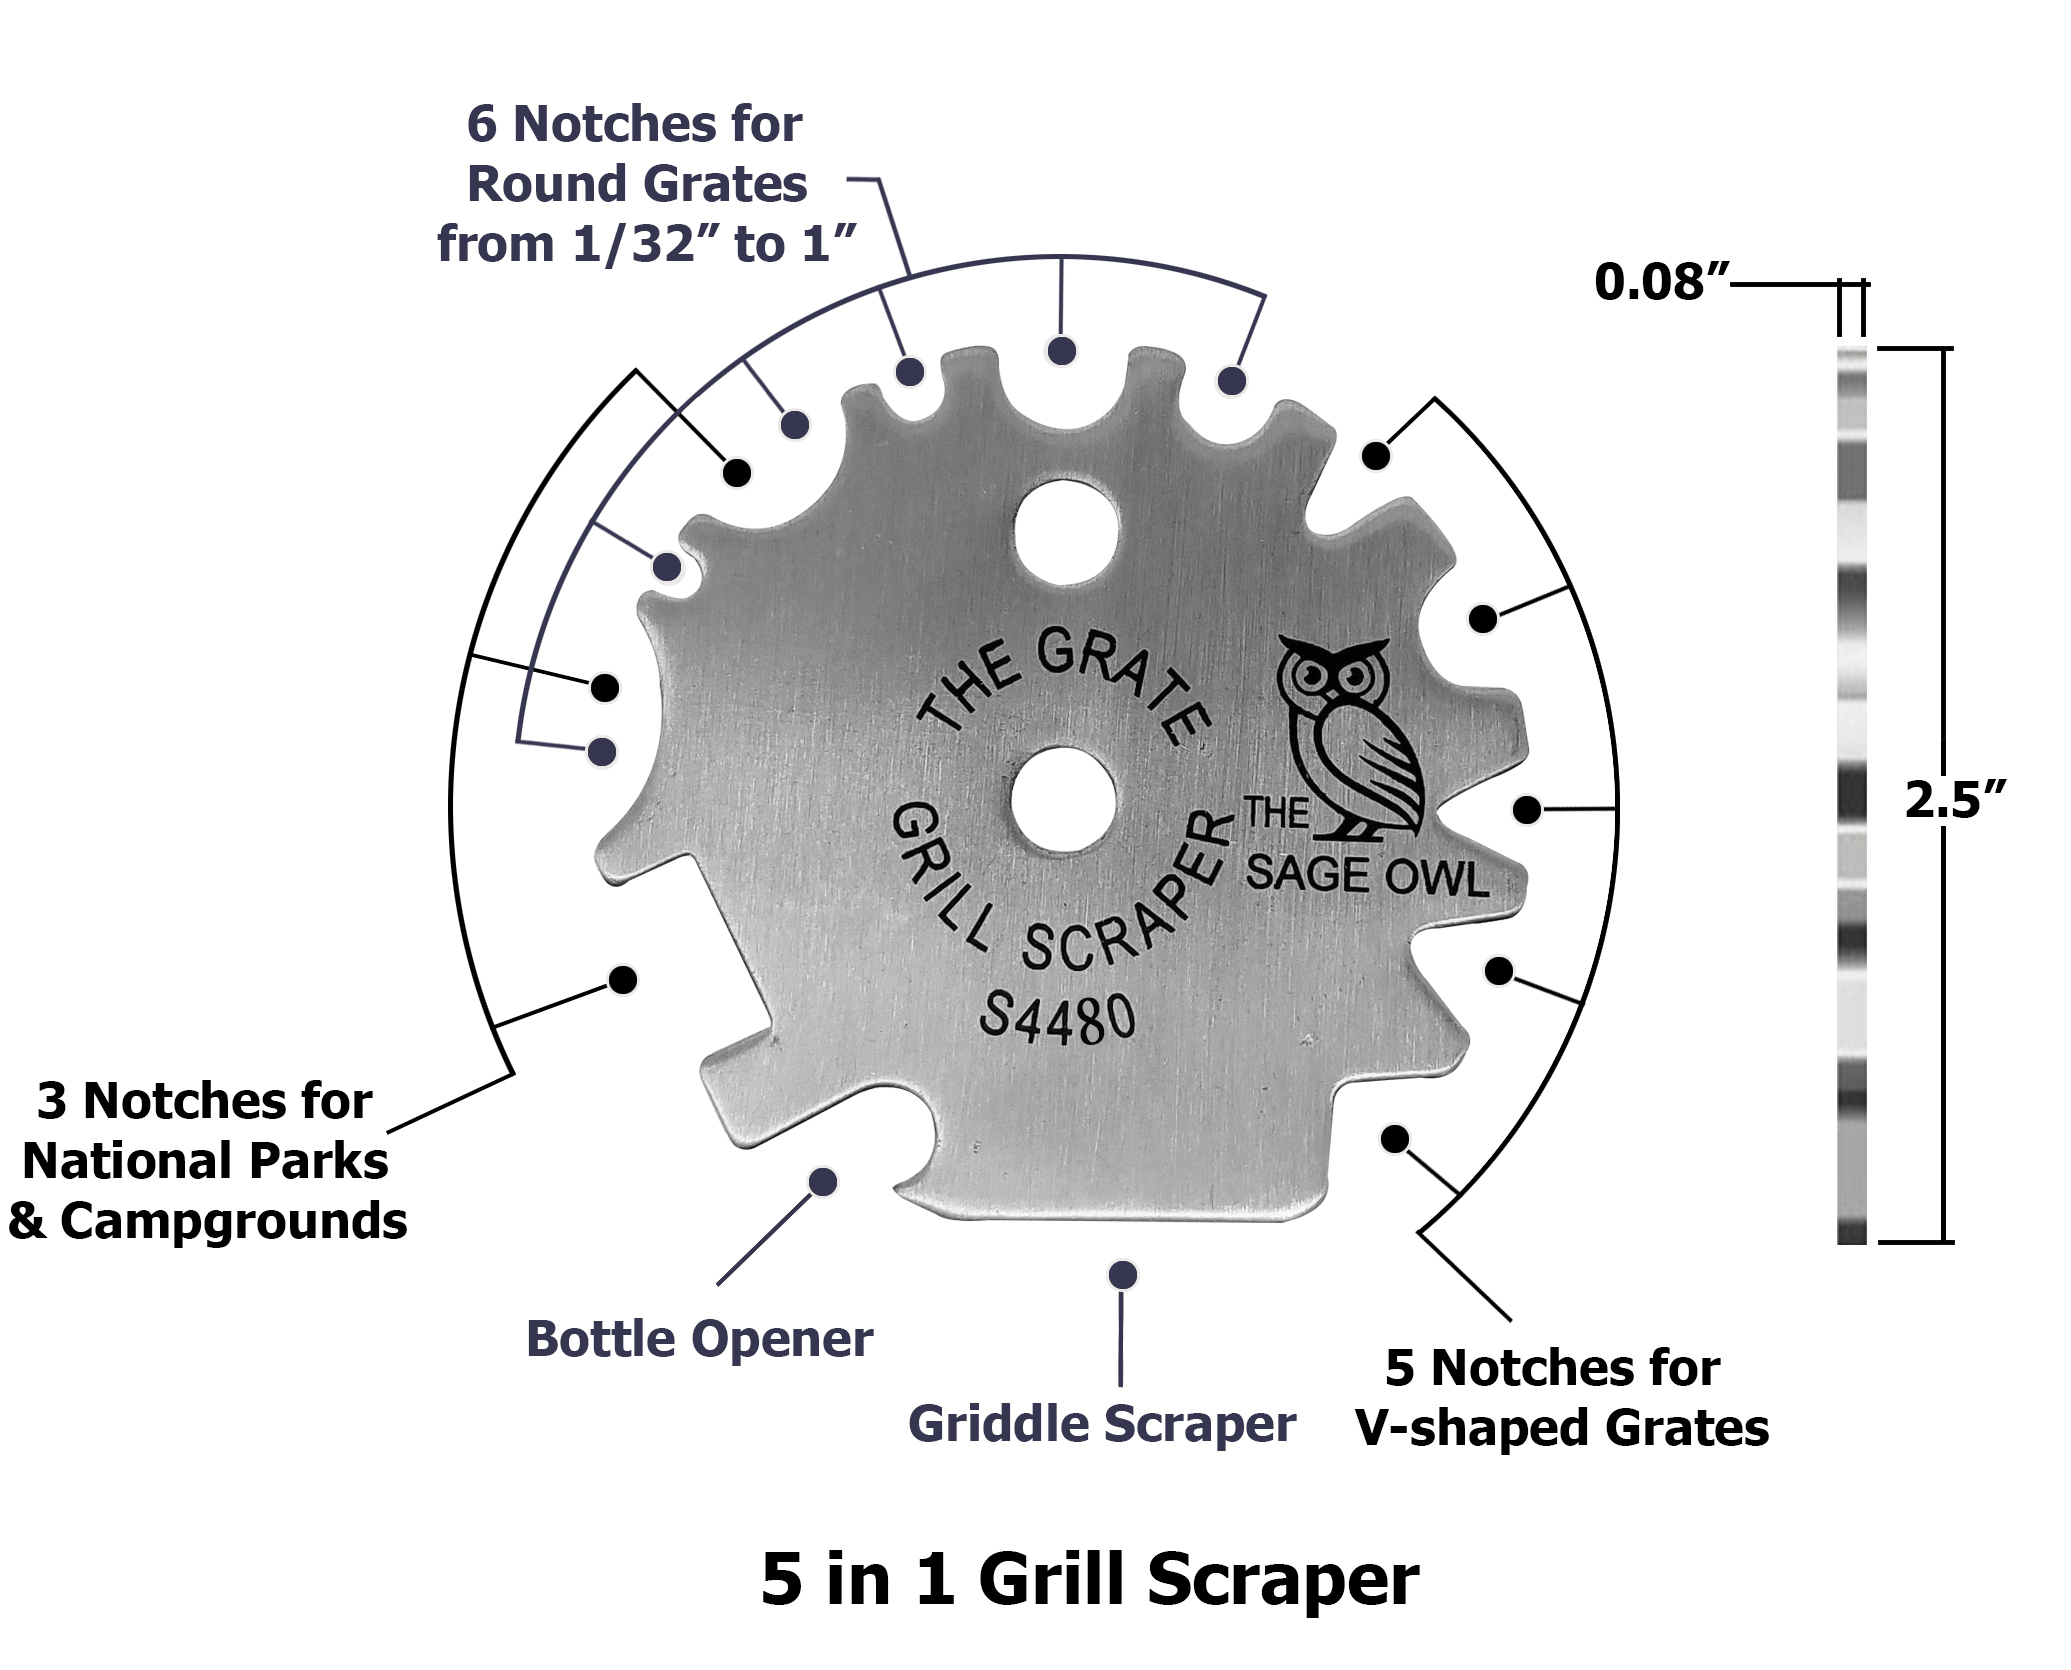 S4480 - The Grate Grill Scraper - Stainless Steel BBQ Grill Tool